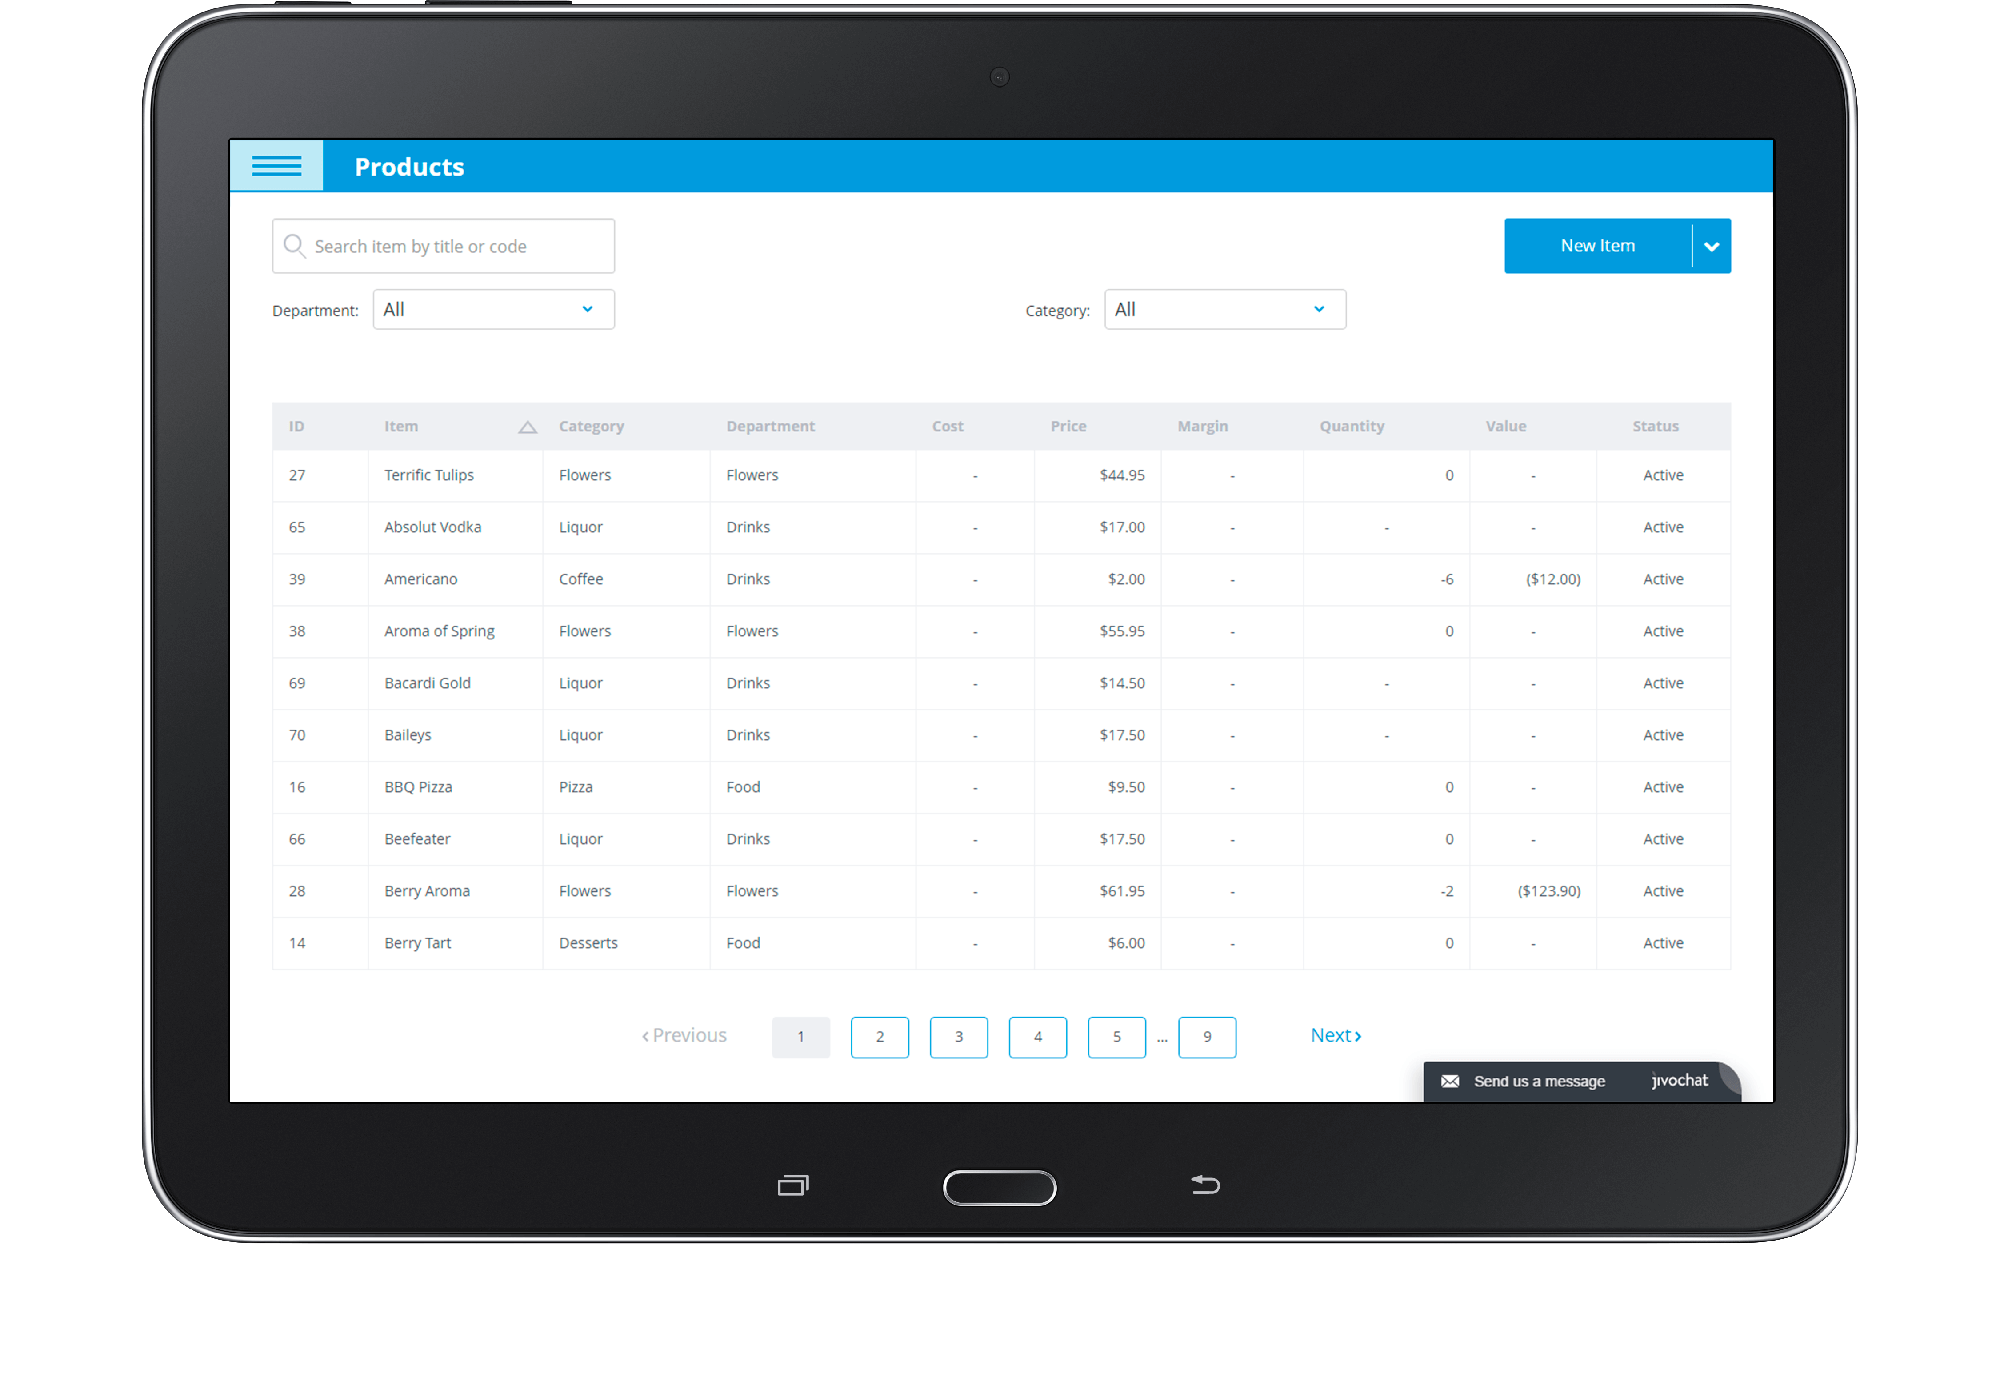 eHopper Software - View product and price lists